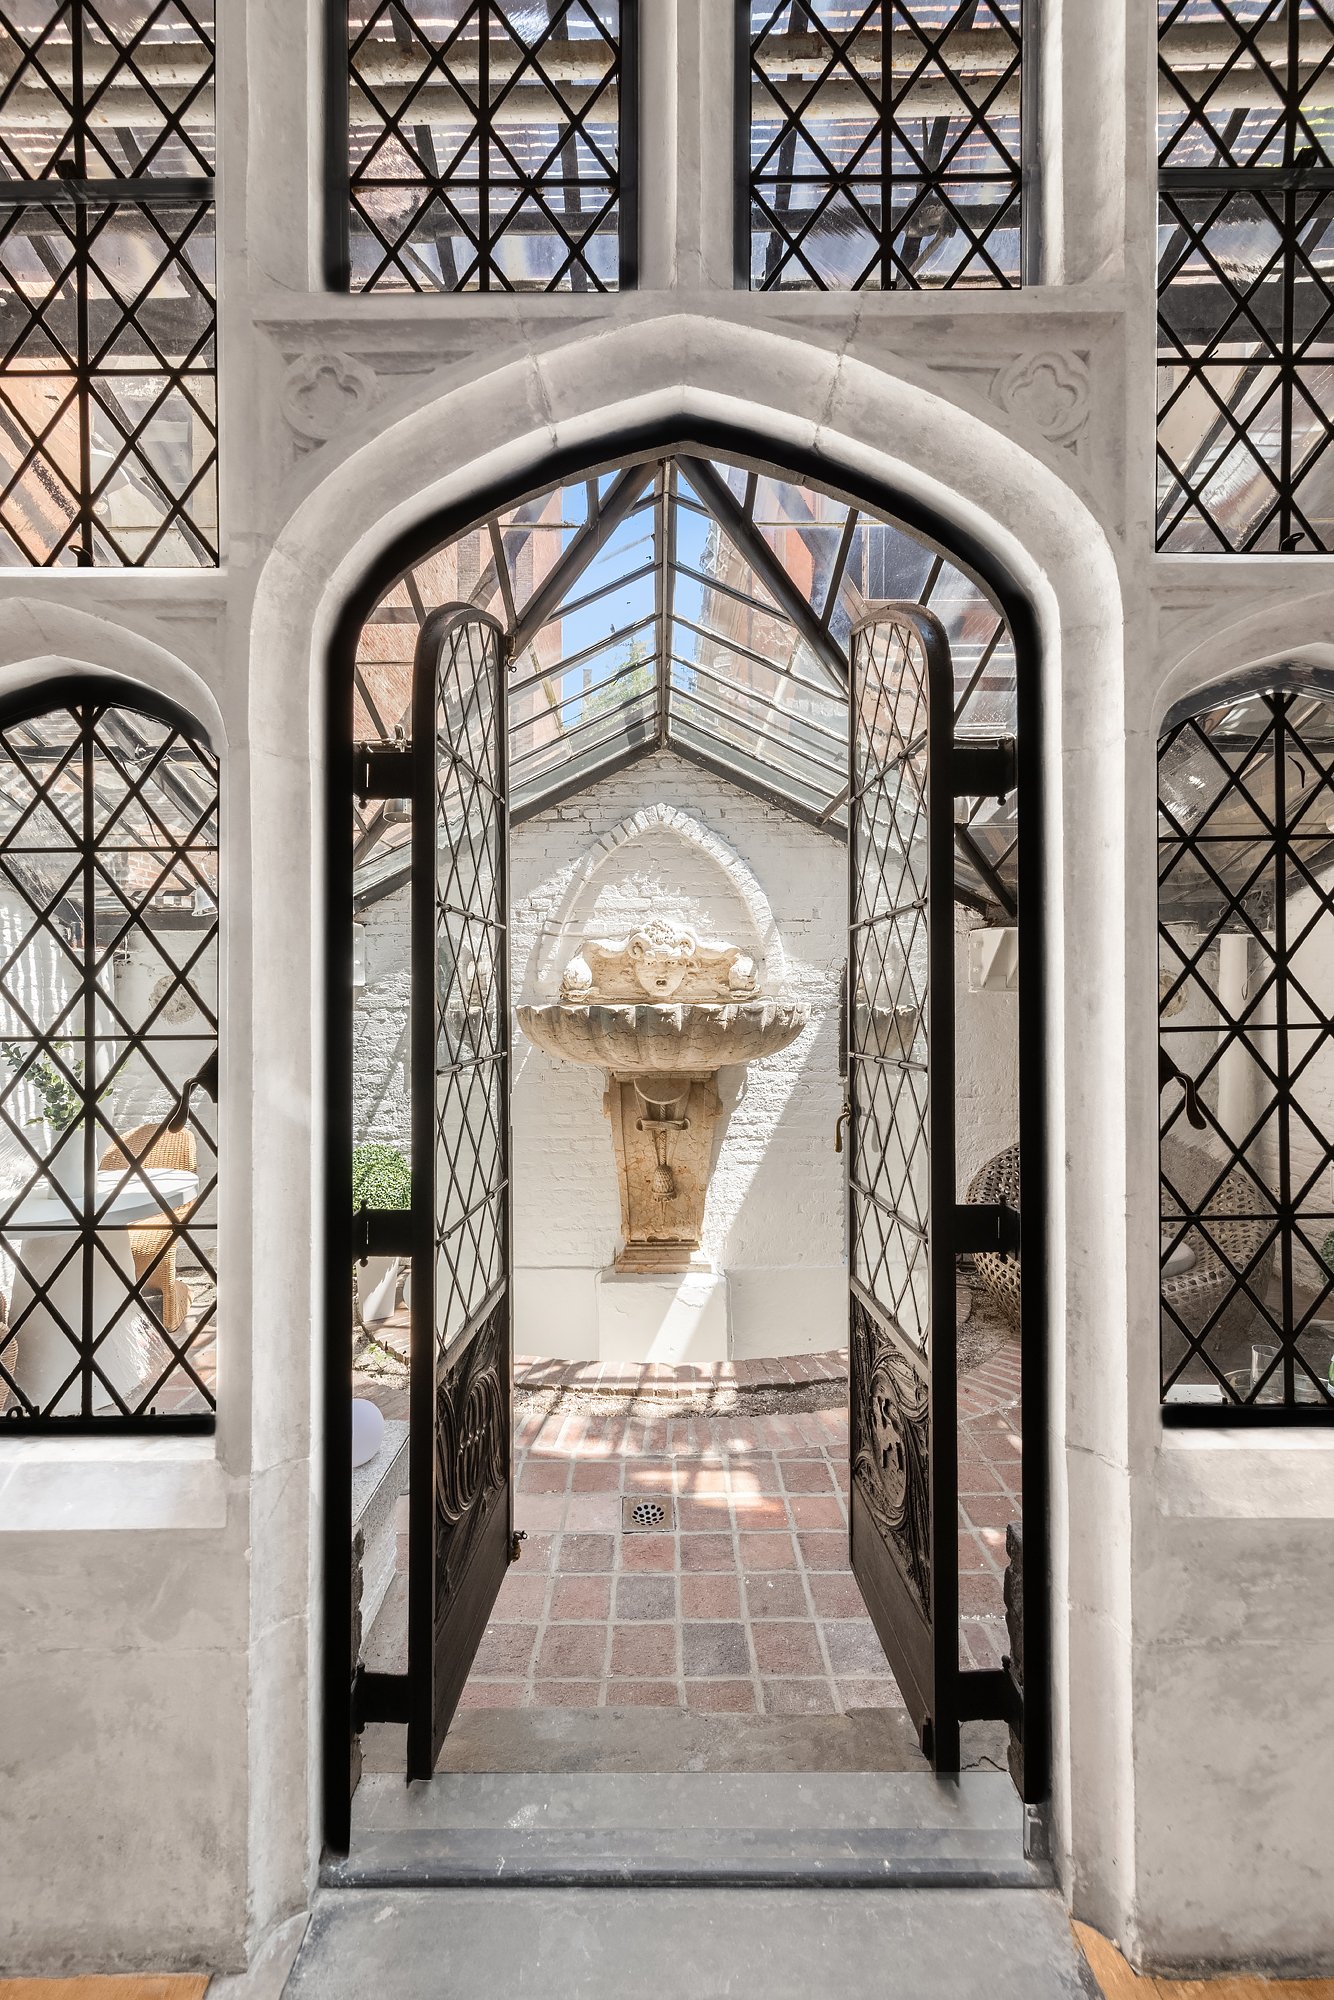 Francis York  “Best on the Block” Gothic Townhouse in Gramercy Park, New York City  00004.jpg